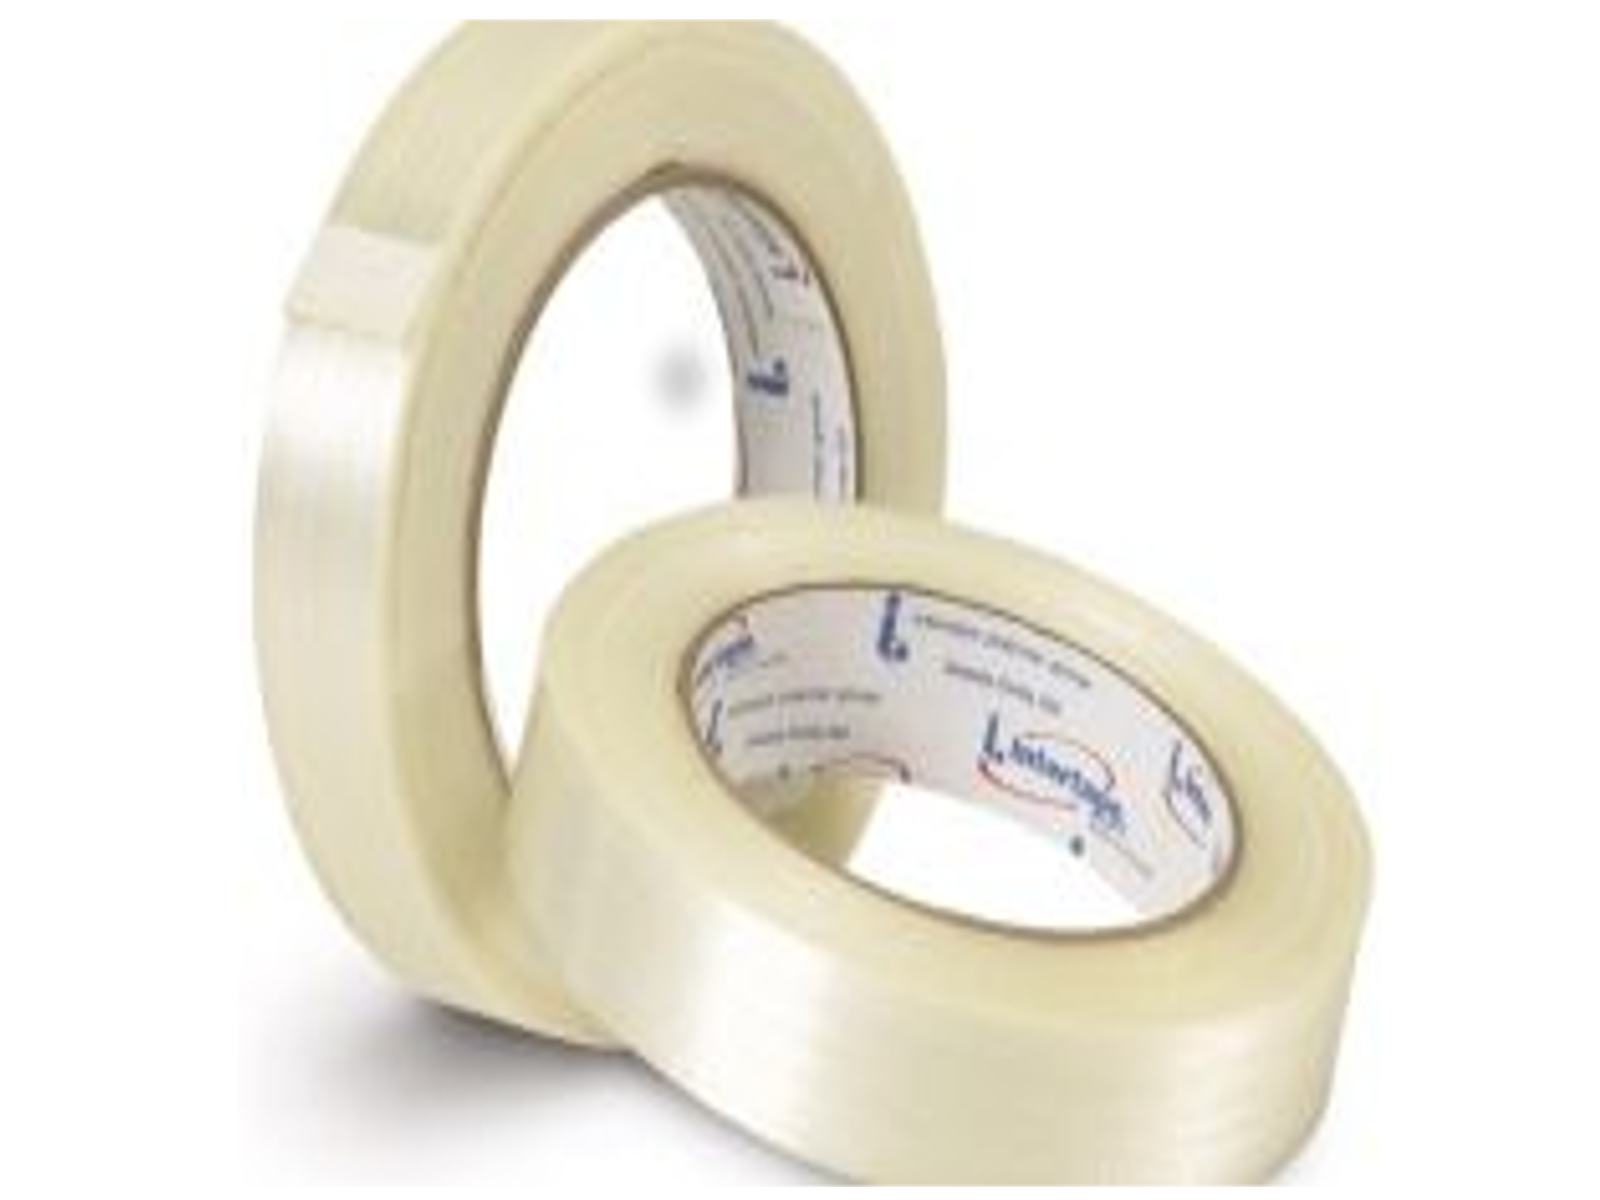 FILAMENT TAPE 1&quot; 24MM X
54.8M RG3...54 NTERTAPE 36/CA
131 Tensile Strength 
Adhesion to Steel 41
4.9 Mil thickness
3% Elongation